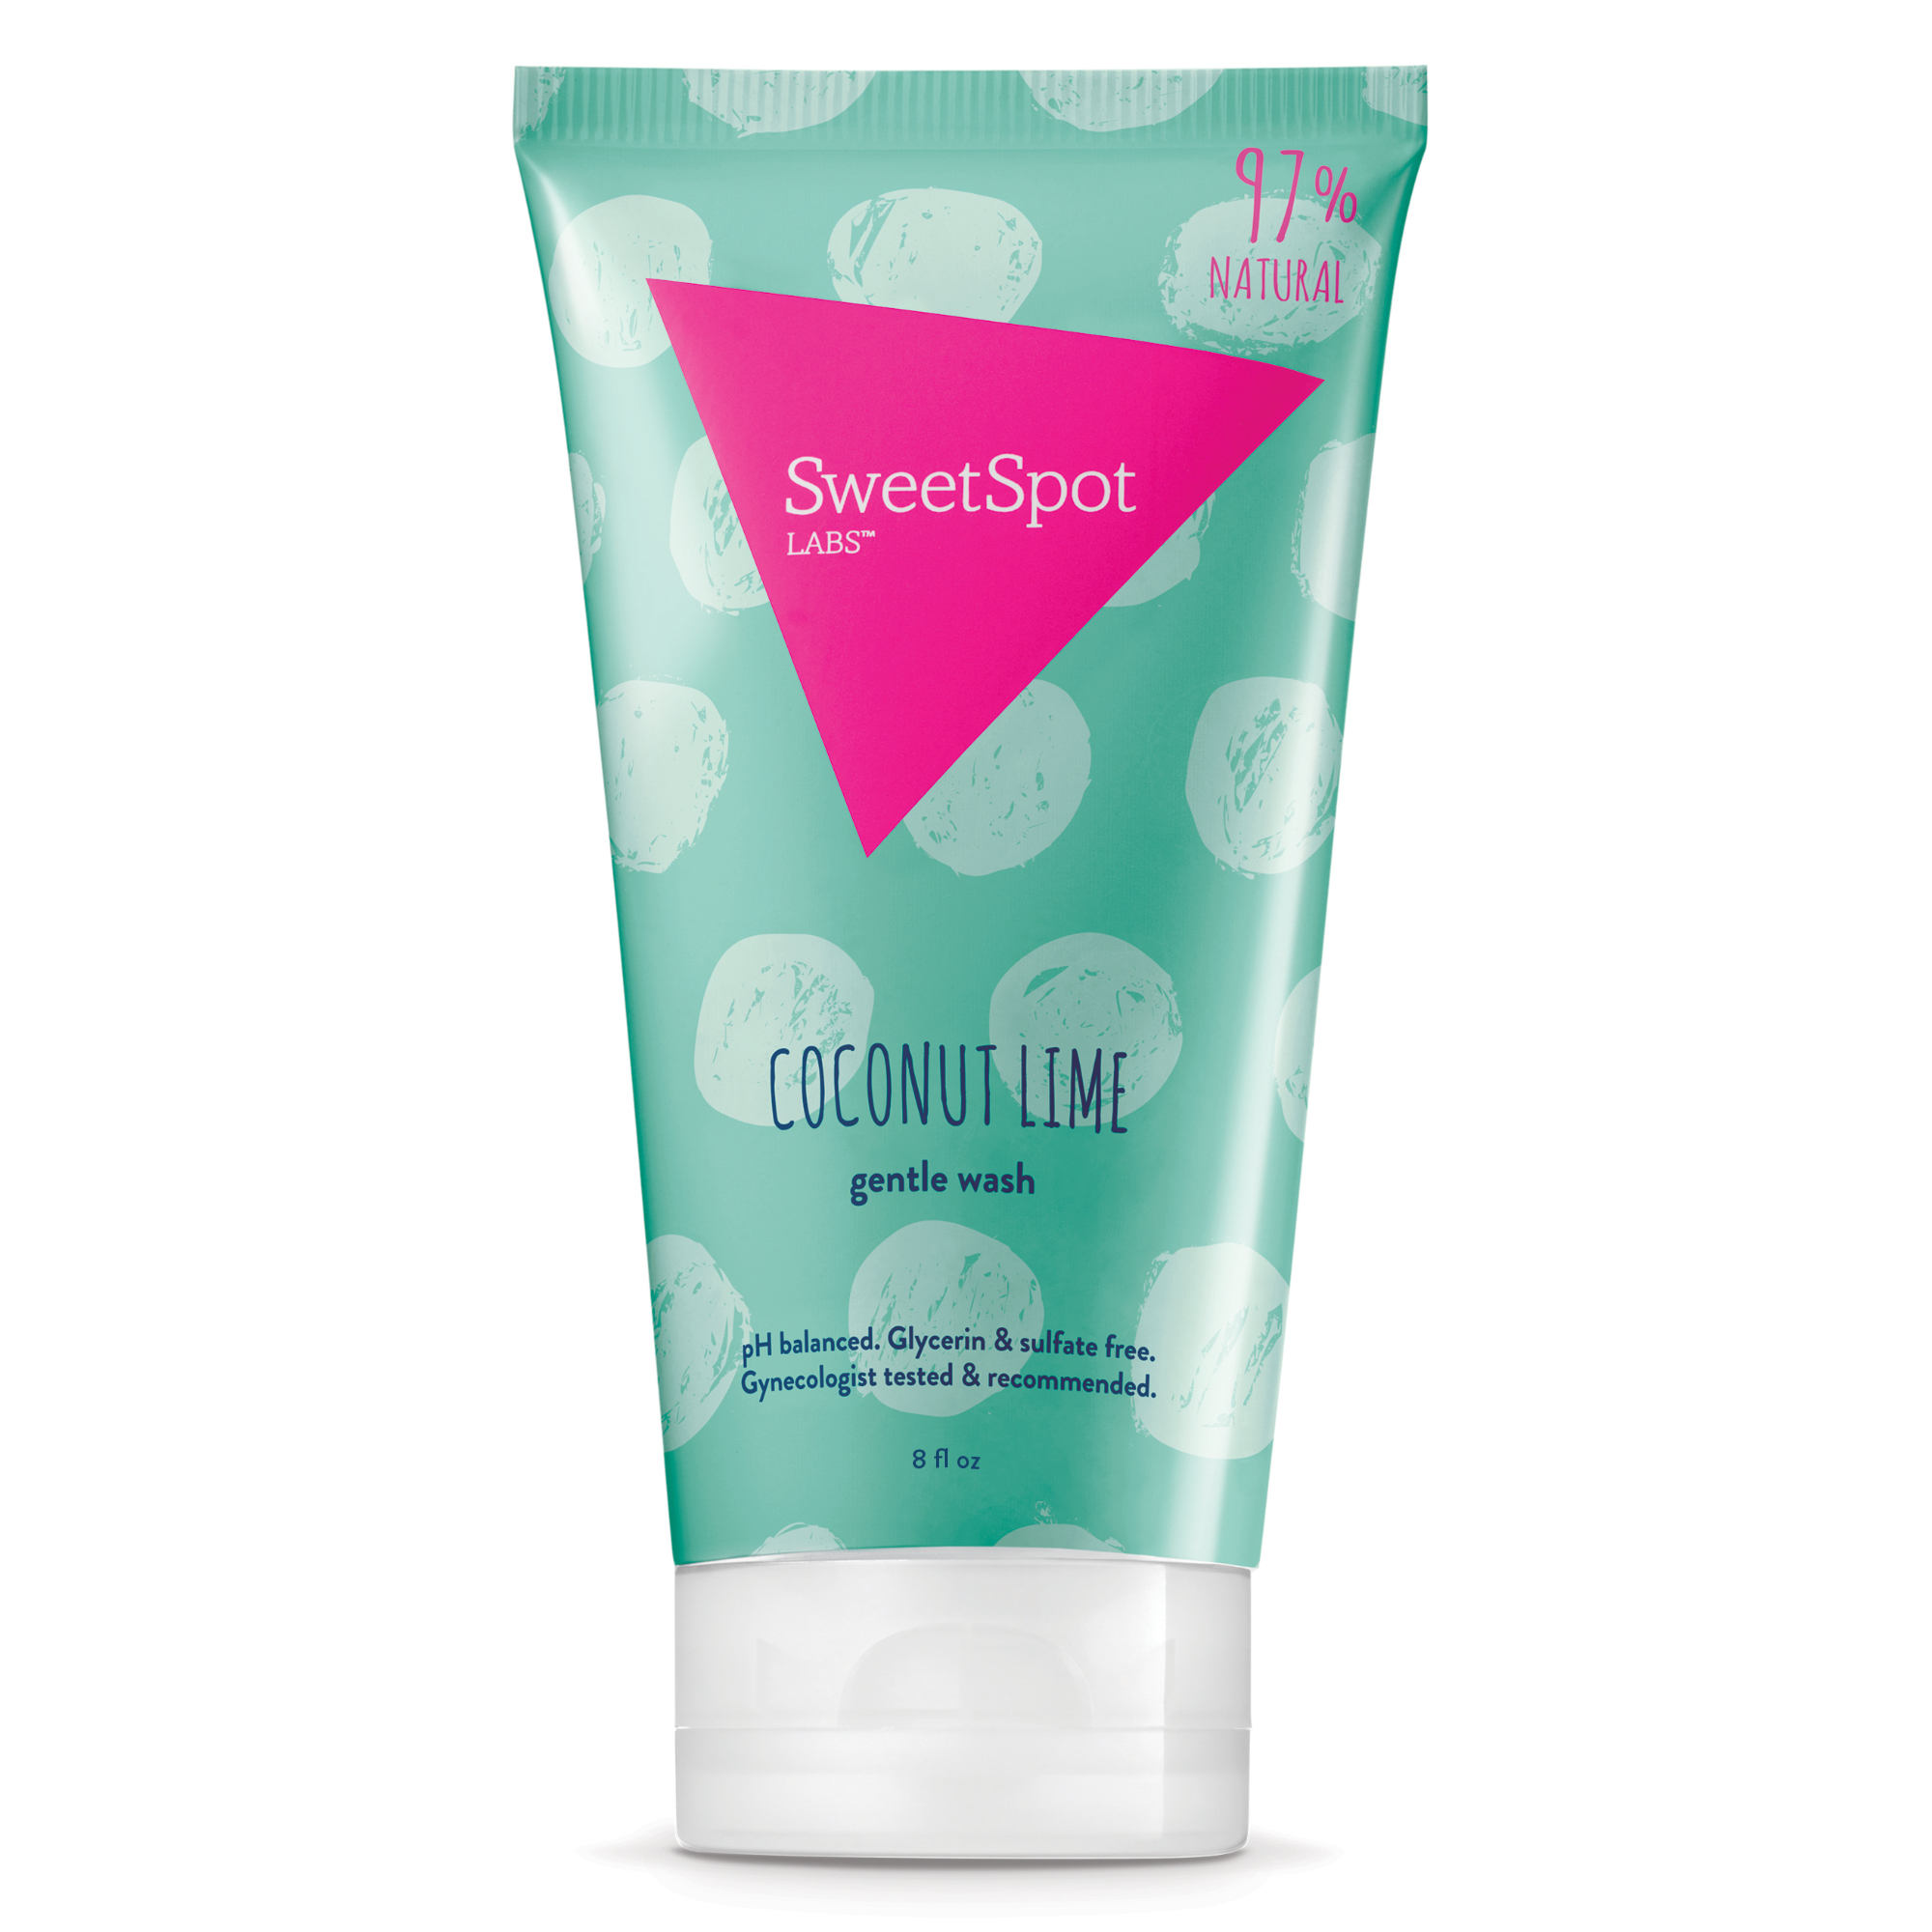 SweetSpot Labs Coconut Lime Gentle Wash 8 z. - image 1 of 7